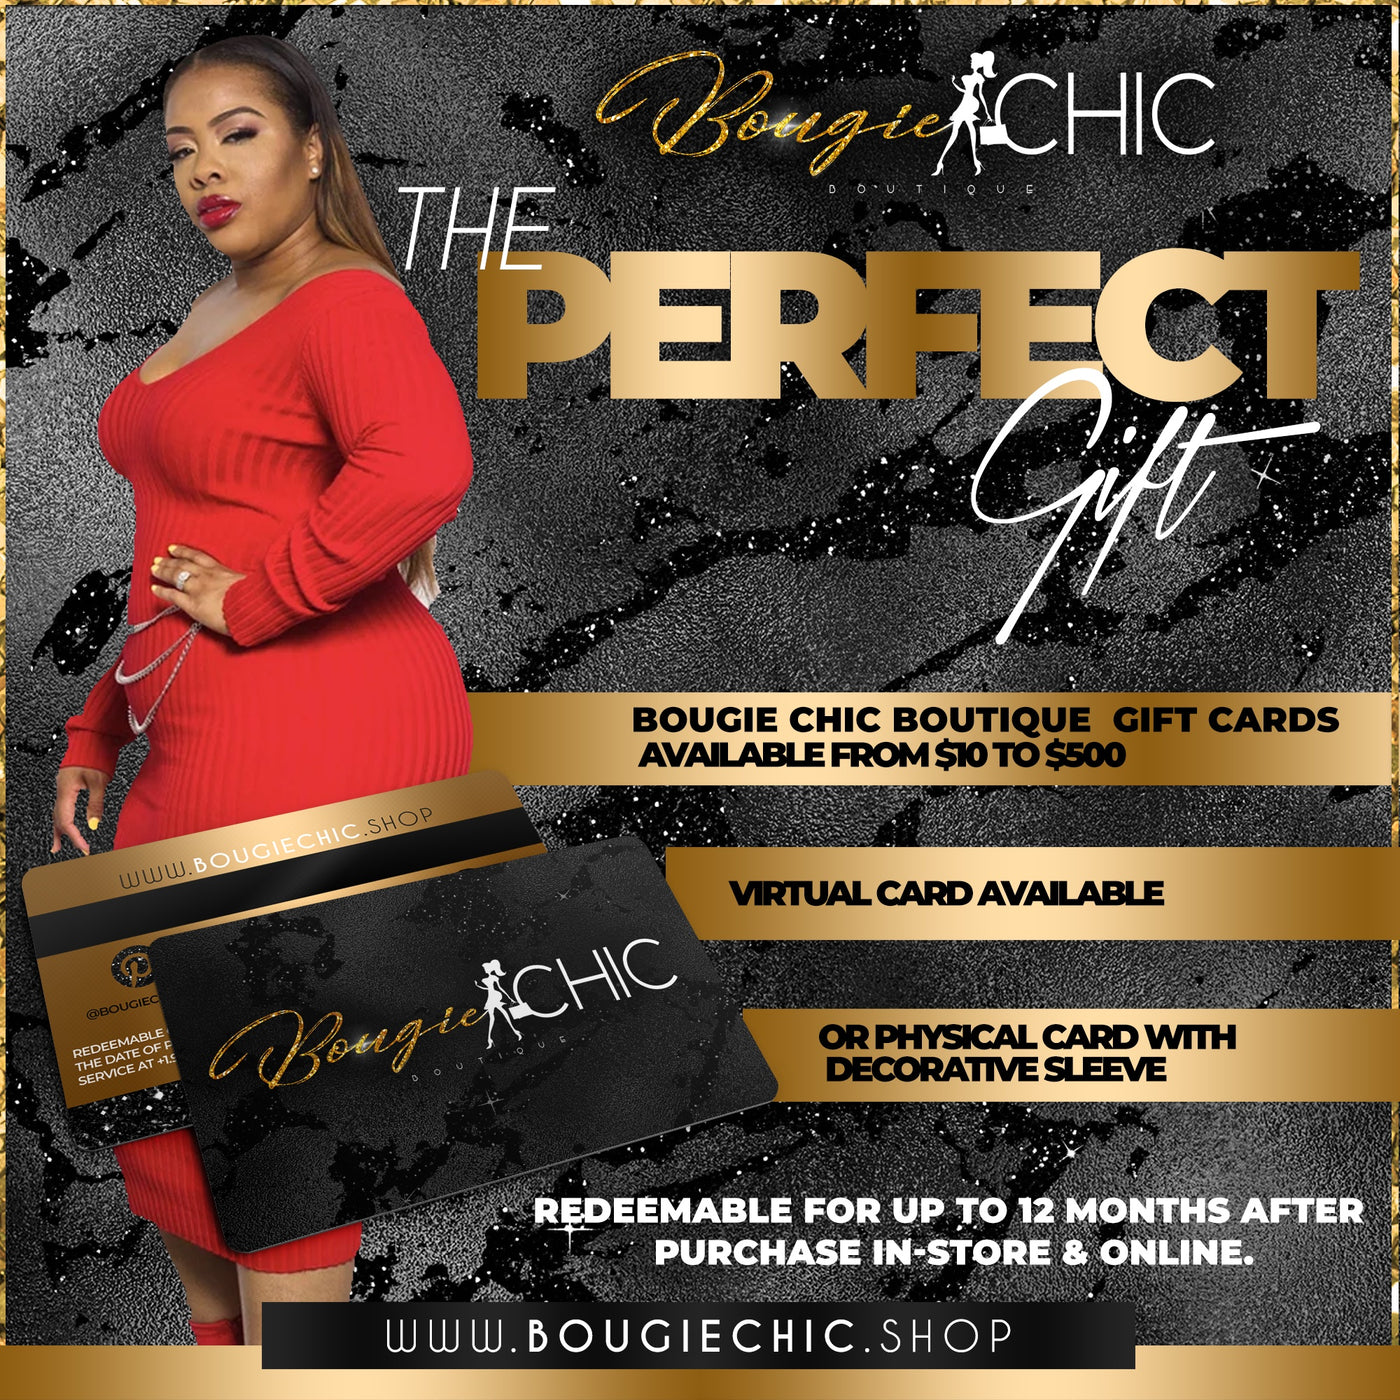 The BC Gift Card